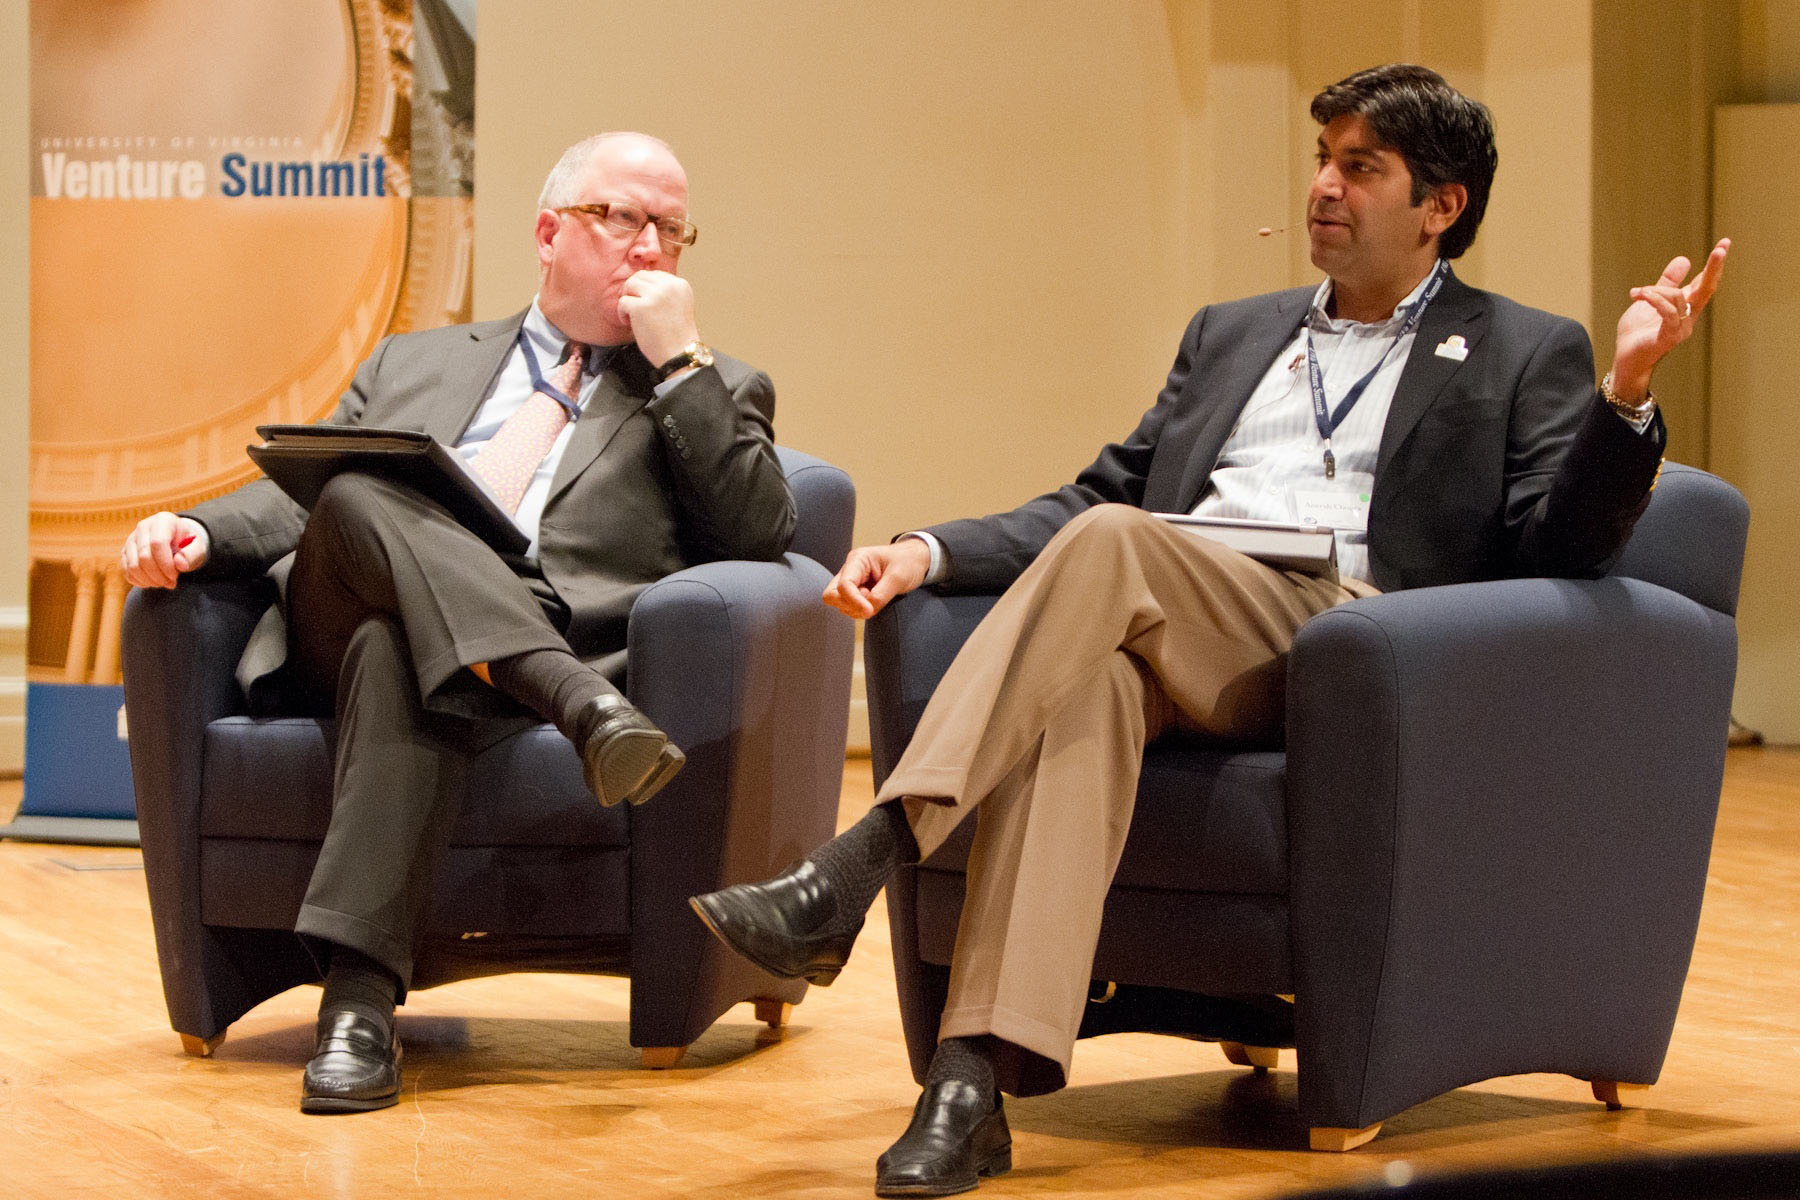 Mark Crowell, and Aneesh Chopra talk during a panel discussion